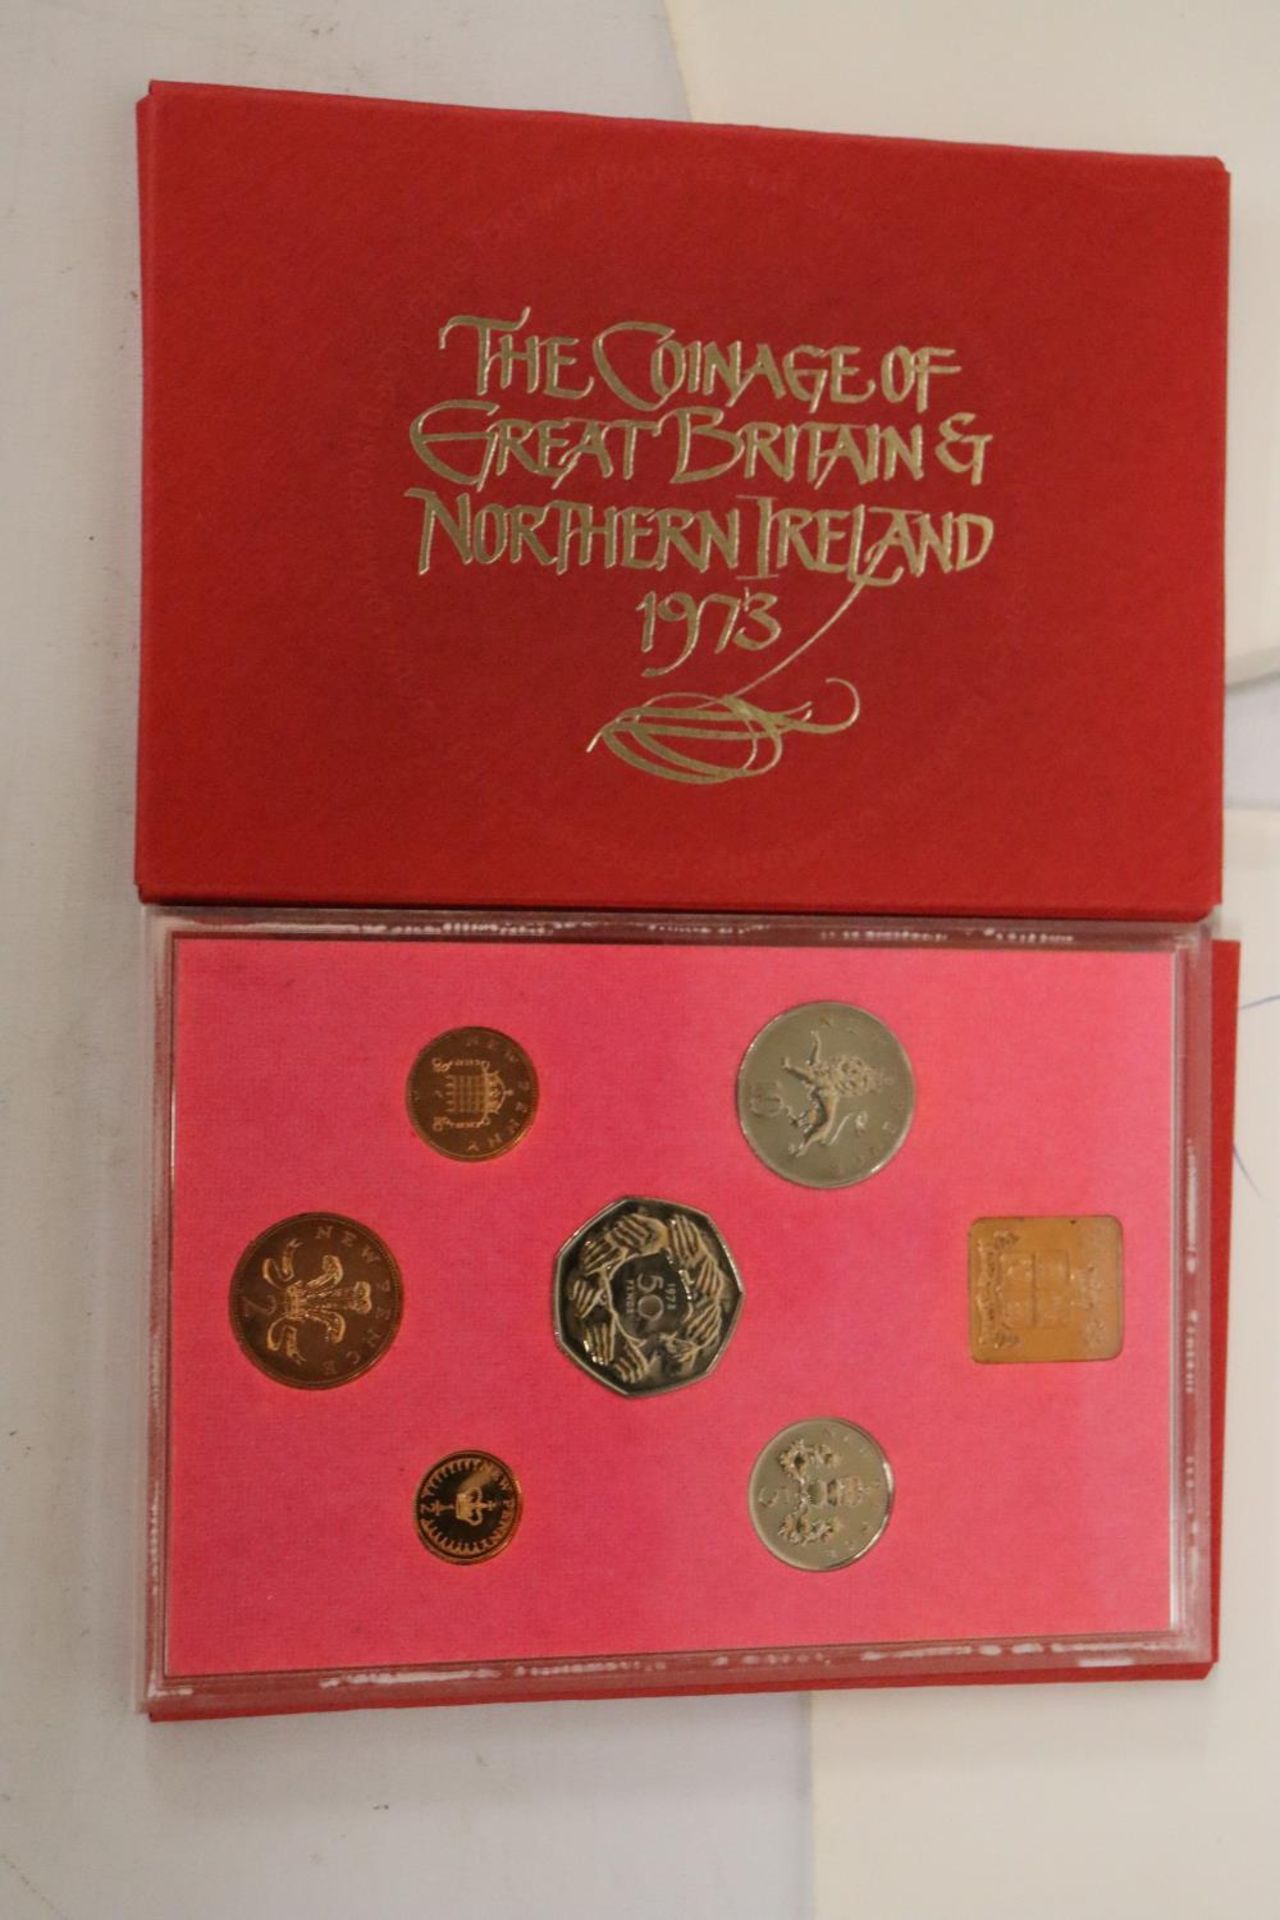 UK & NI , 2 X 1972, 2 X’73, 2 X ’74 AND 2 X ’75 YEAR PACKS OF COINS CONTAINED IN ENVELOPE - Bild 4 aus 5